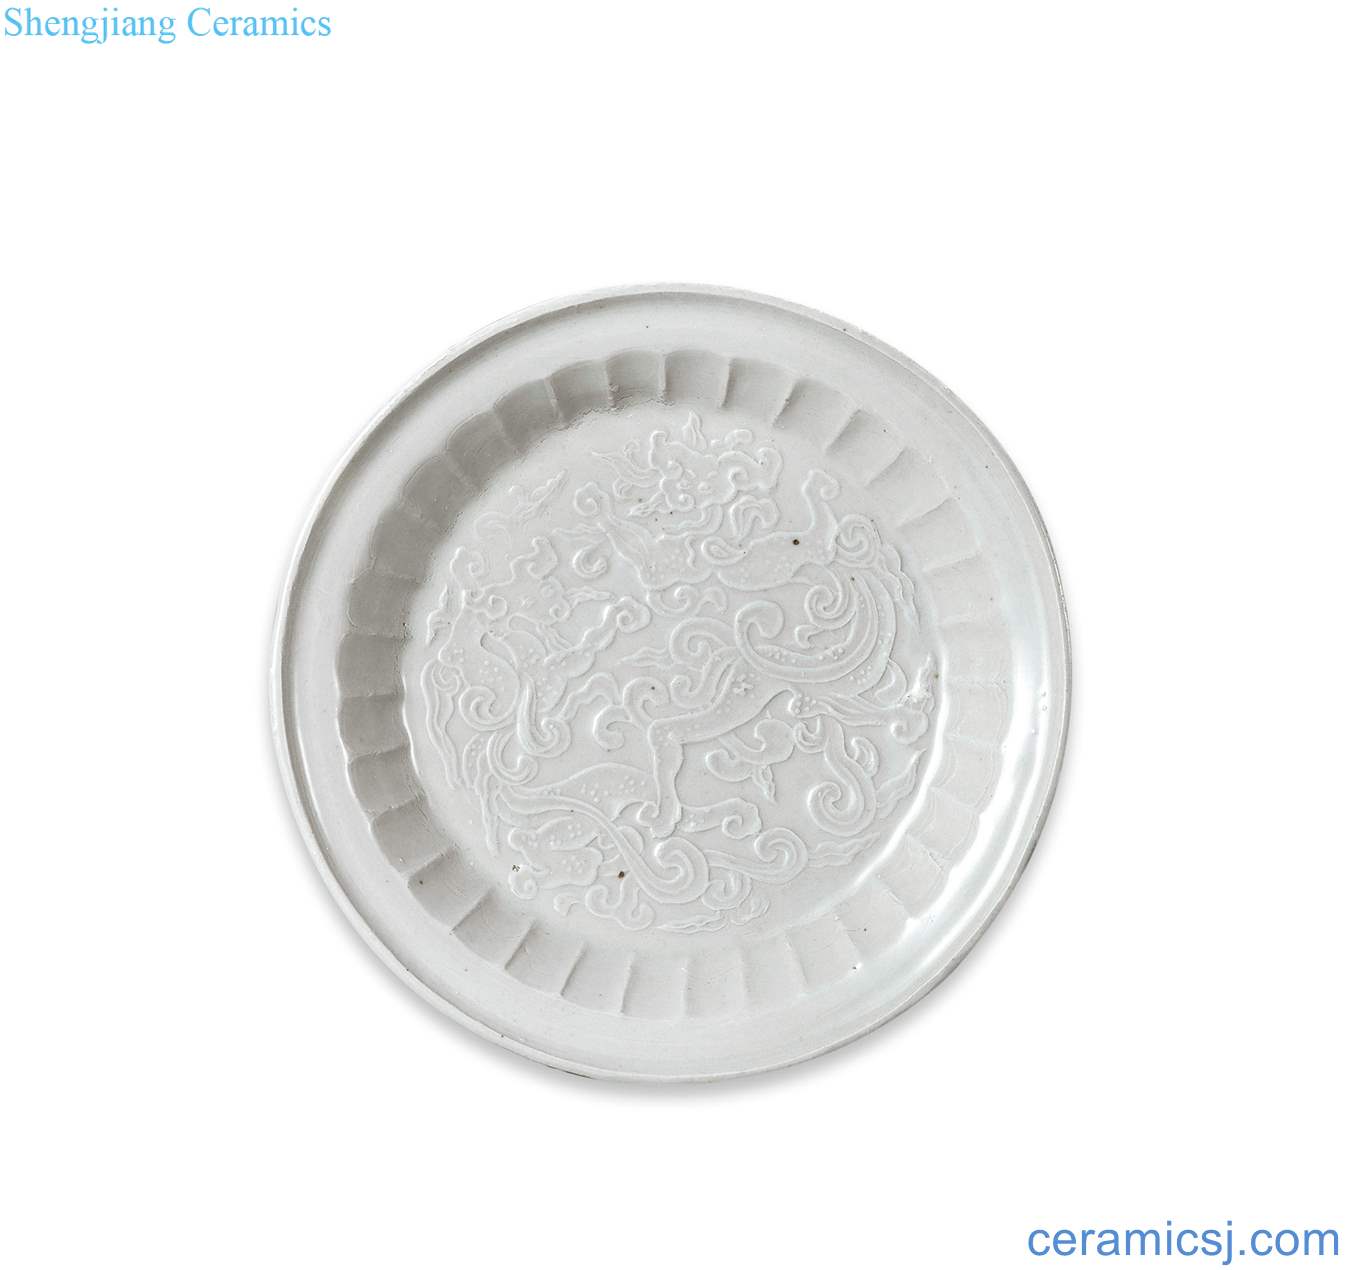 Gold/song kiln stamps flower tray